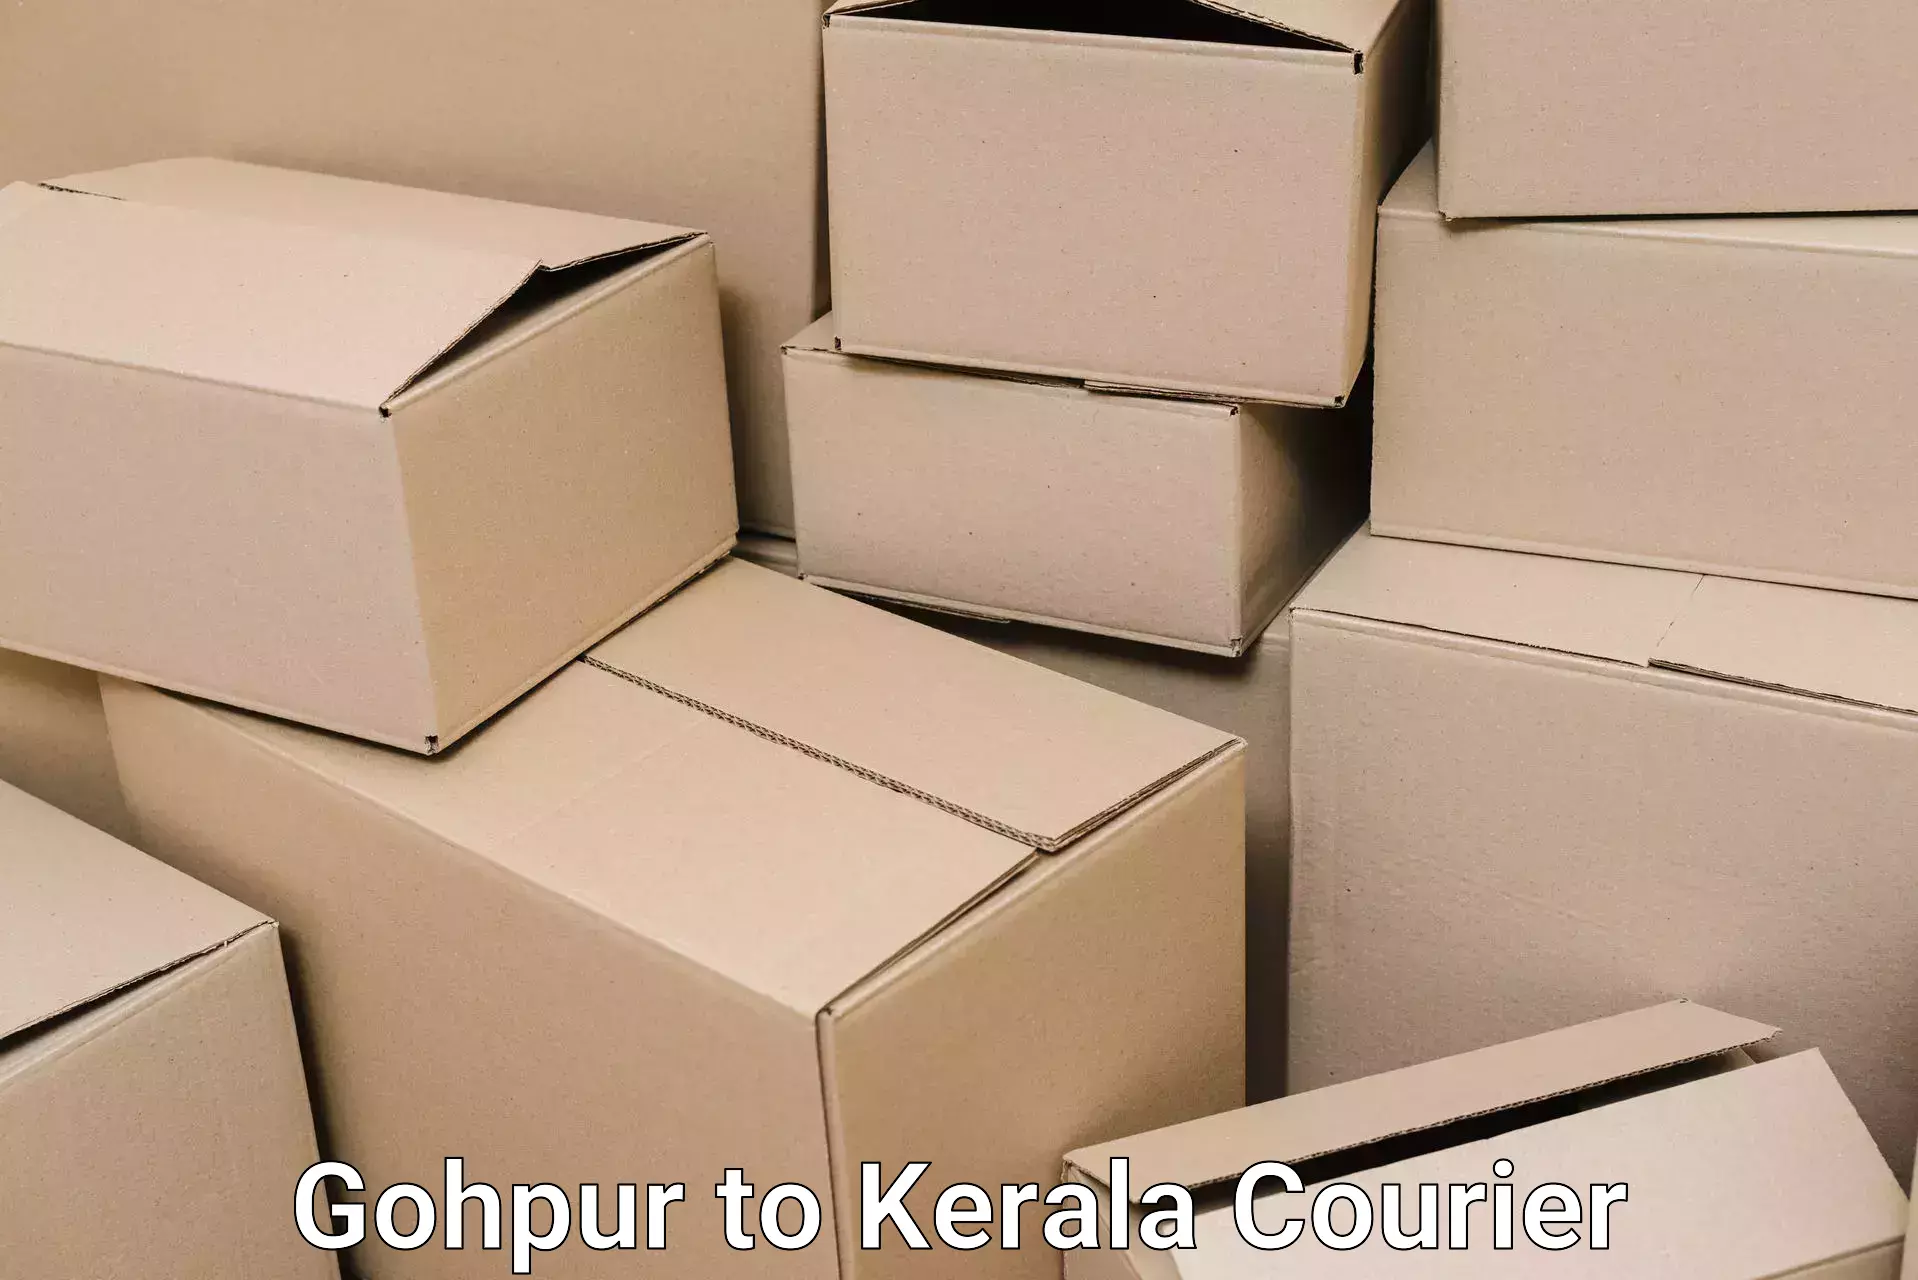 Trusted moving solutions Gohpur to Kerala